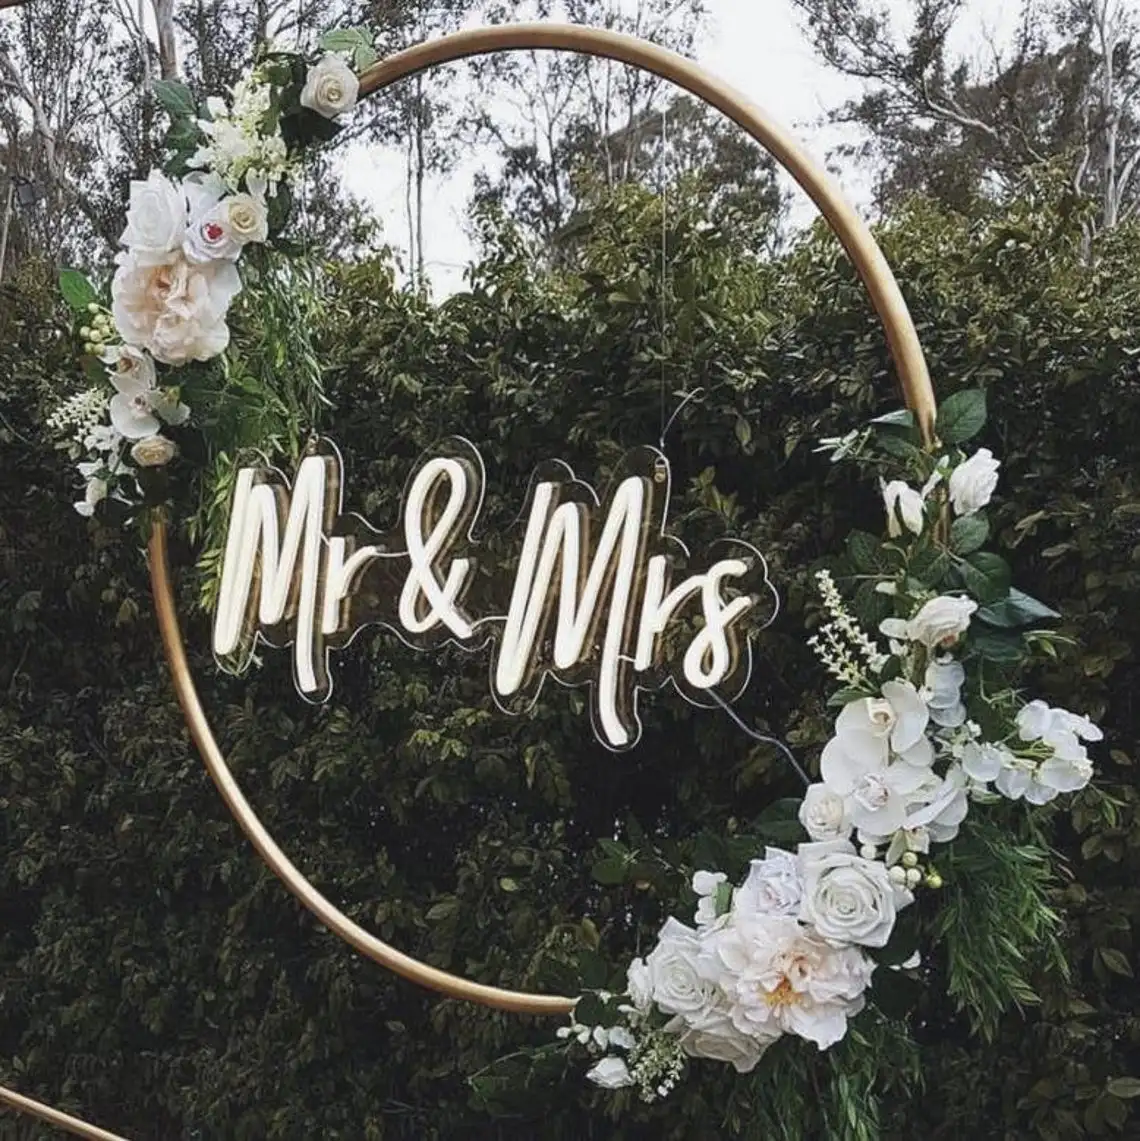 

Wedding Neon Sign Mr & Mrs Party Garden Decor LED art Bedroom Home Decor Propose Lovers Couples Engagement Gift